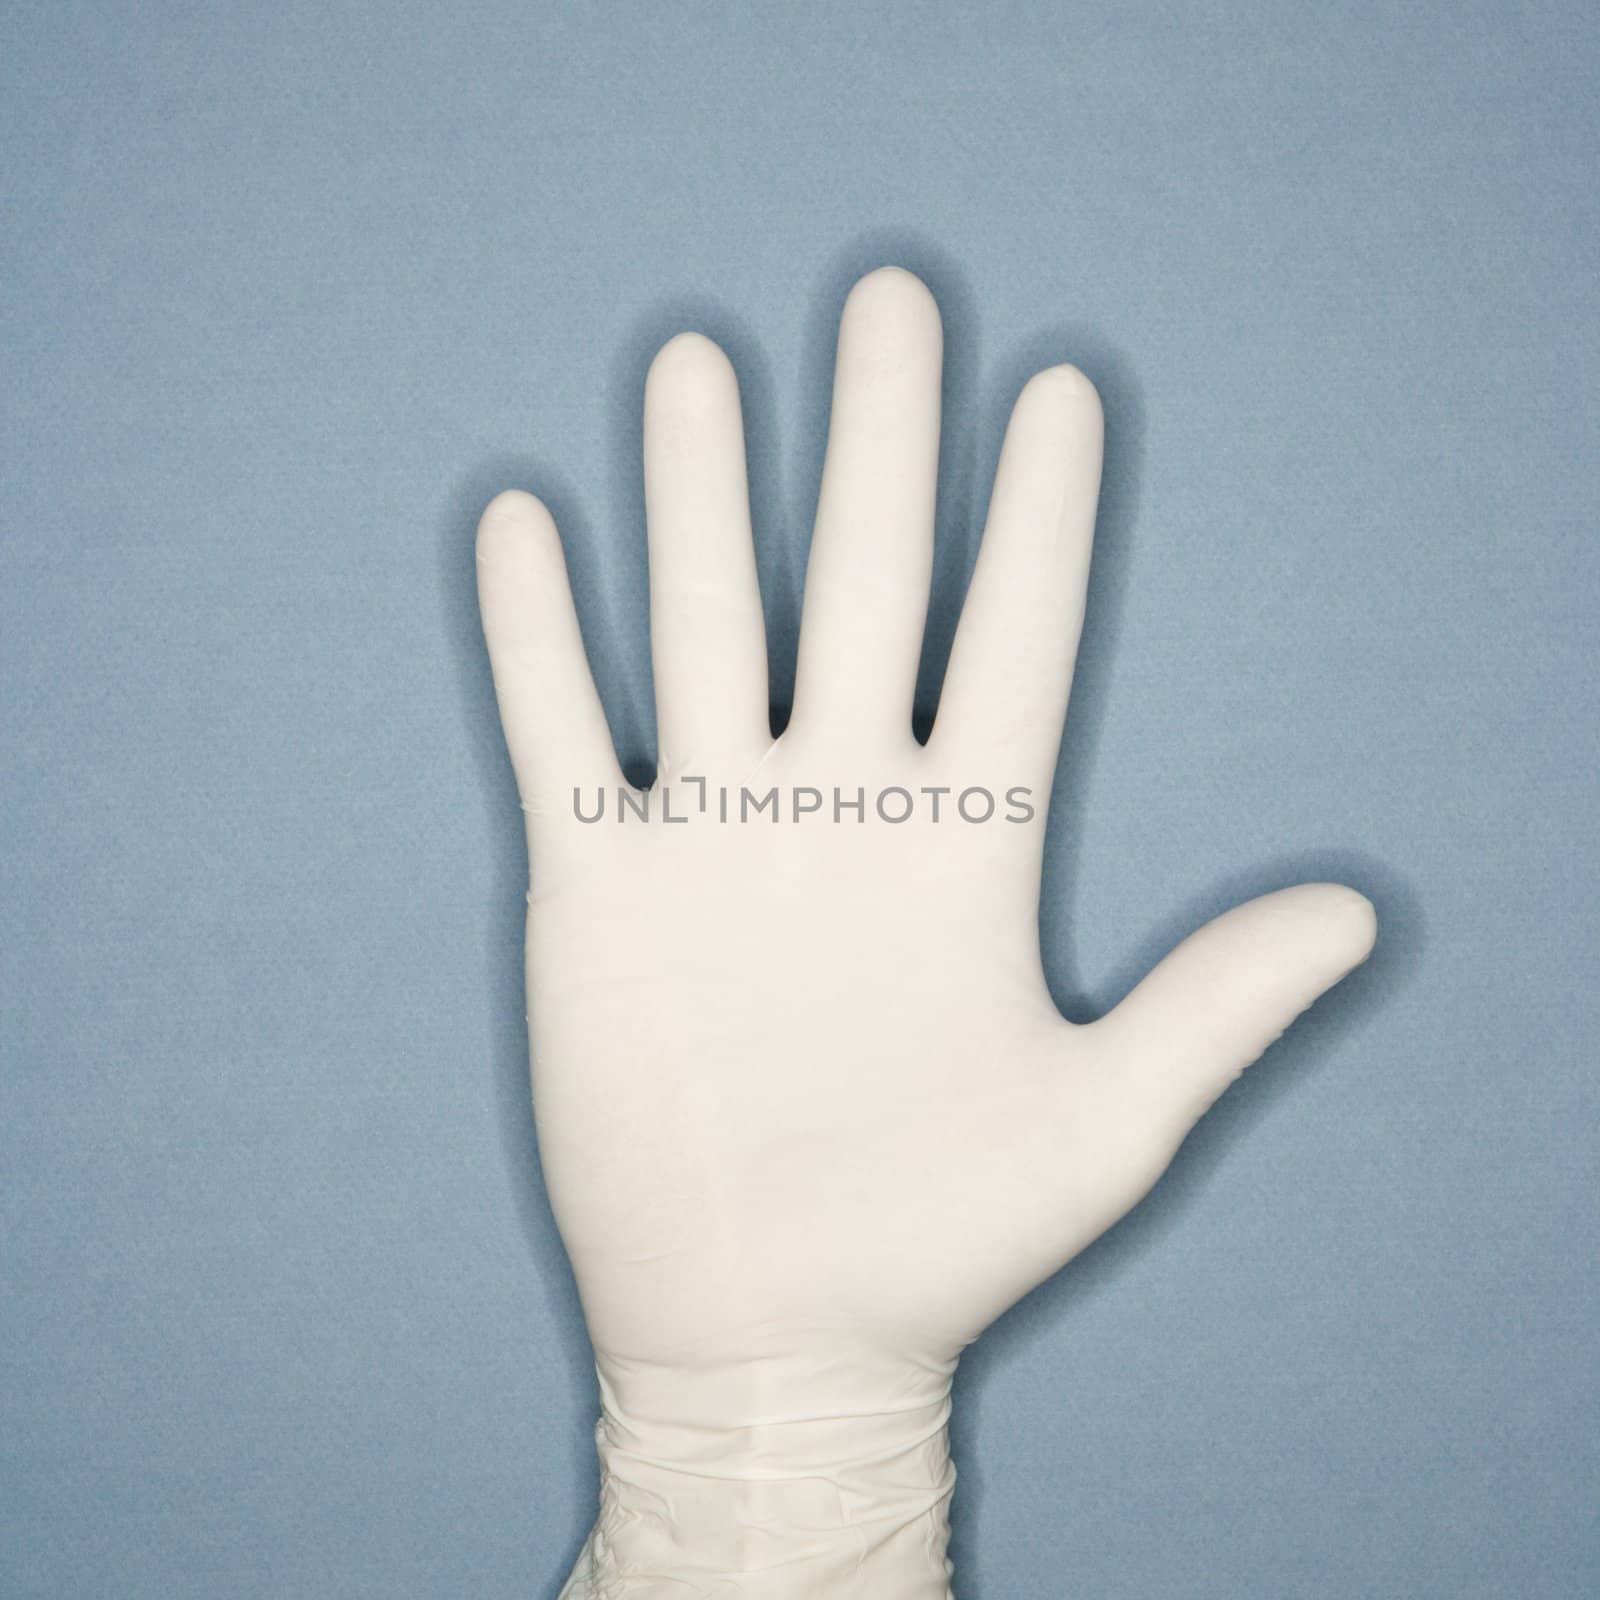 Hand with five fingers extended wearing white rubber glove.